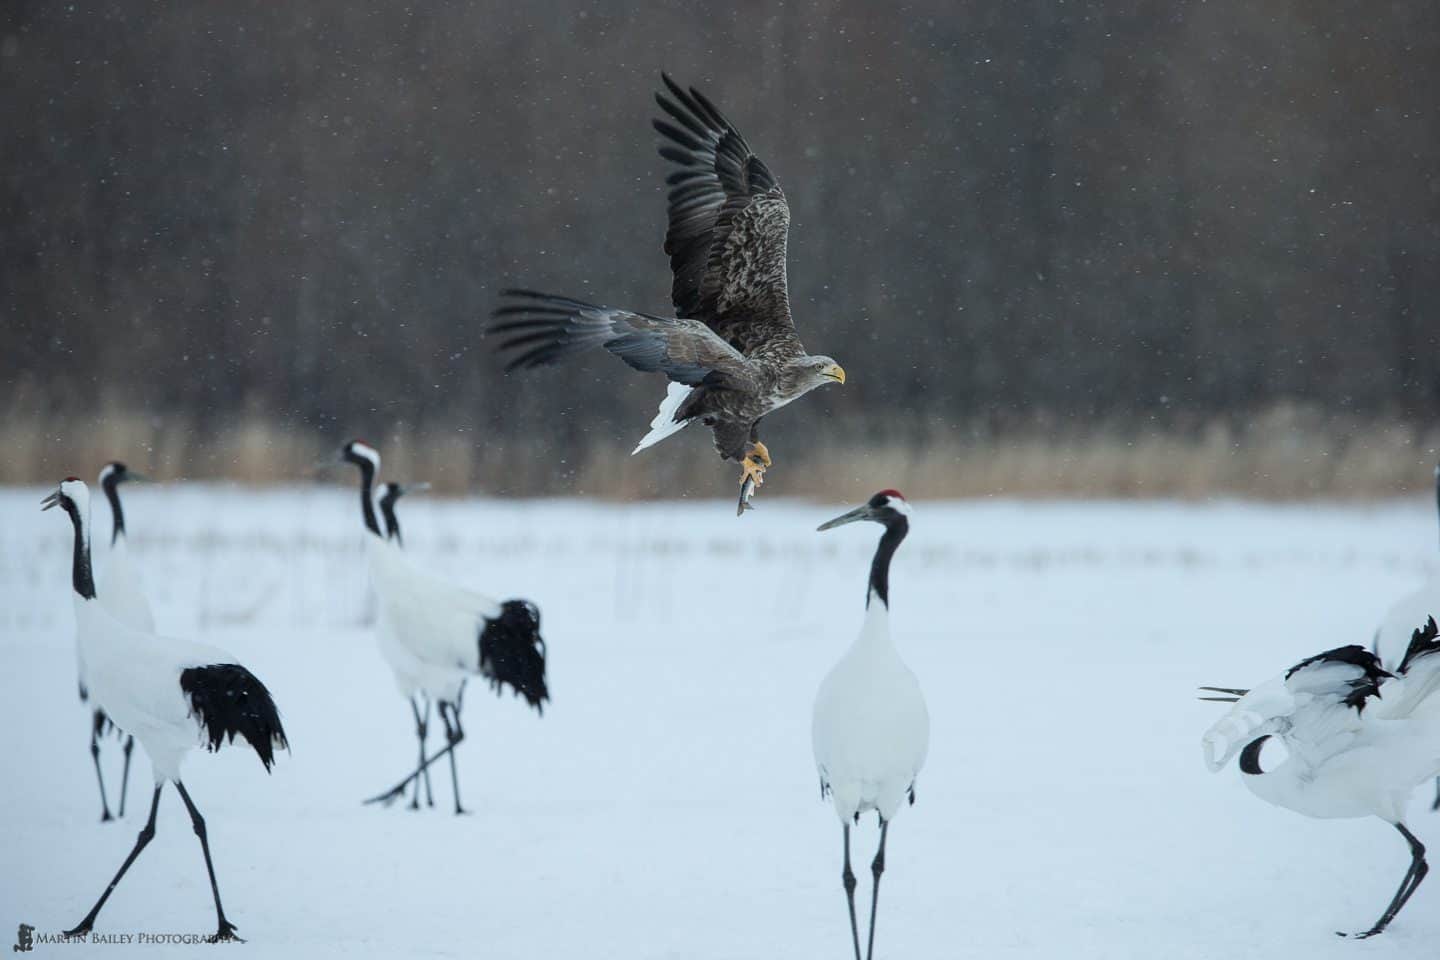 White-Tailed Eagle with Catch